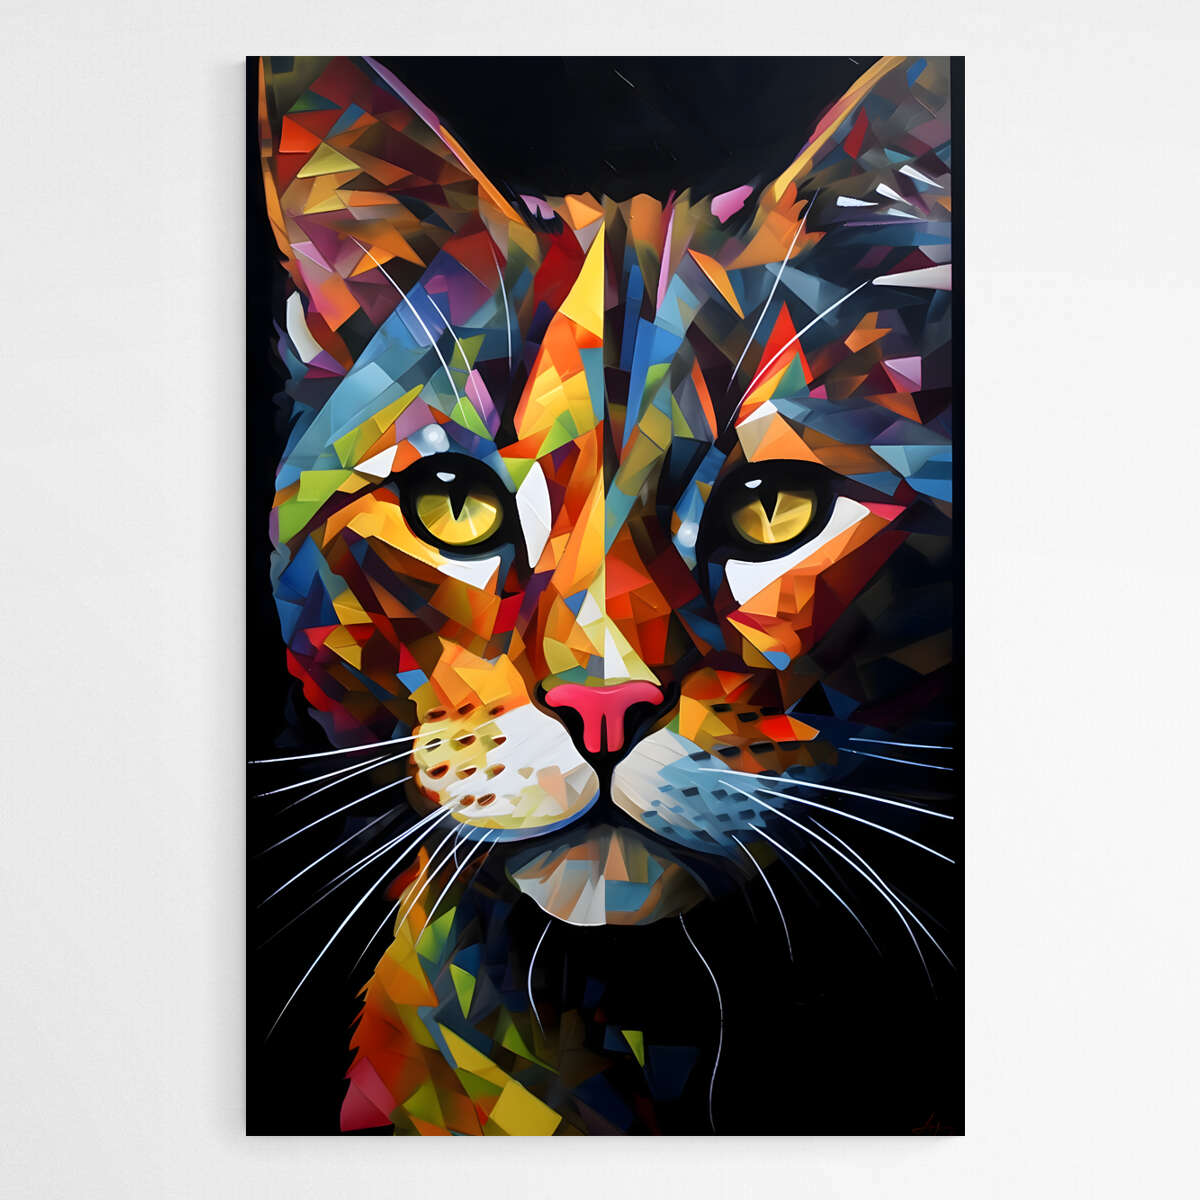 Whiskered Kaleidoscope Cat| Animals Wall Art Prints - The Canvas Hive